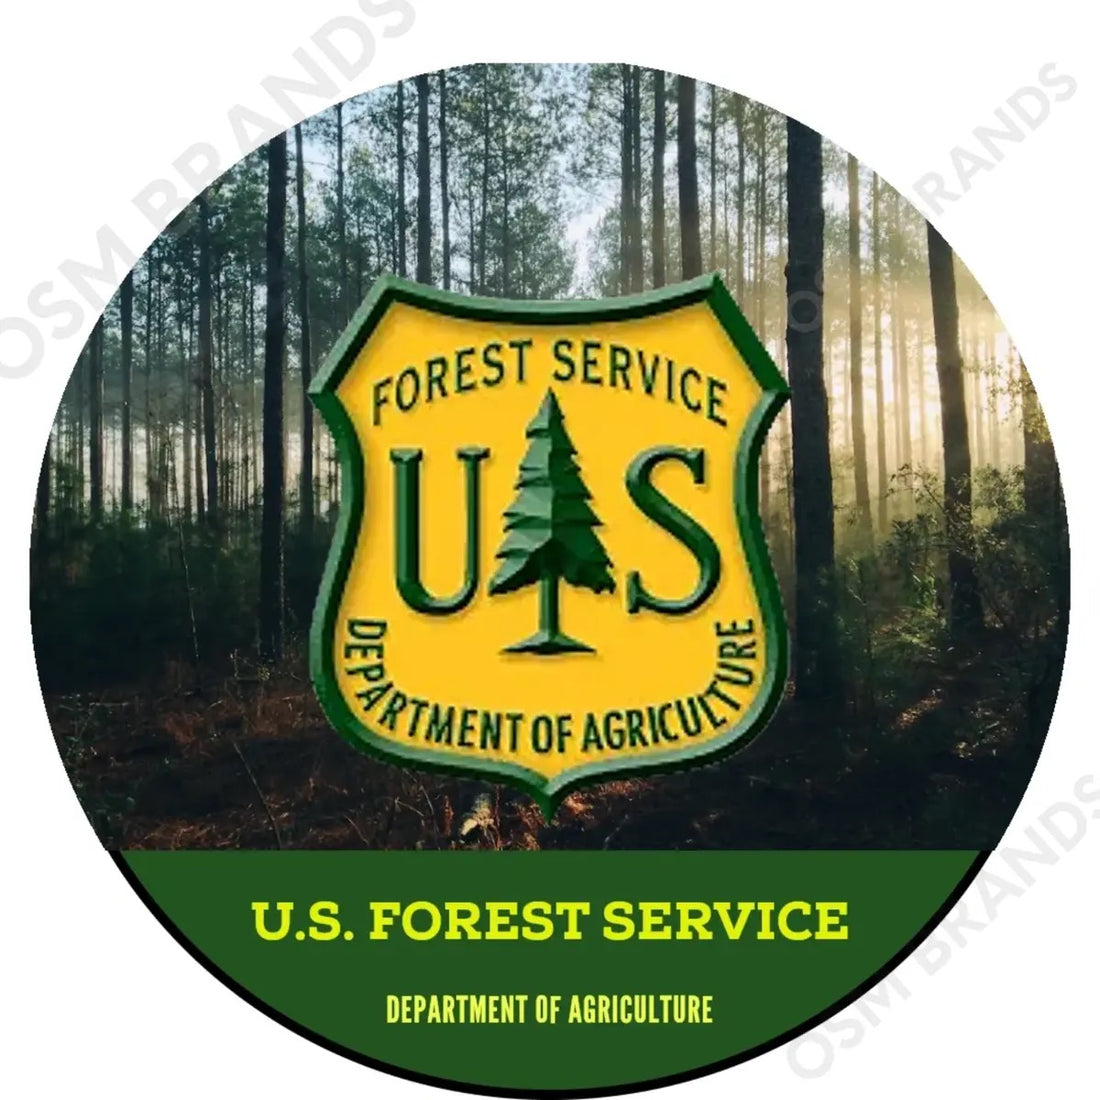 About the U.S. Forest Service-Department of Agriculture